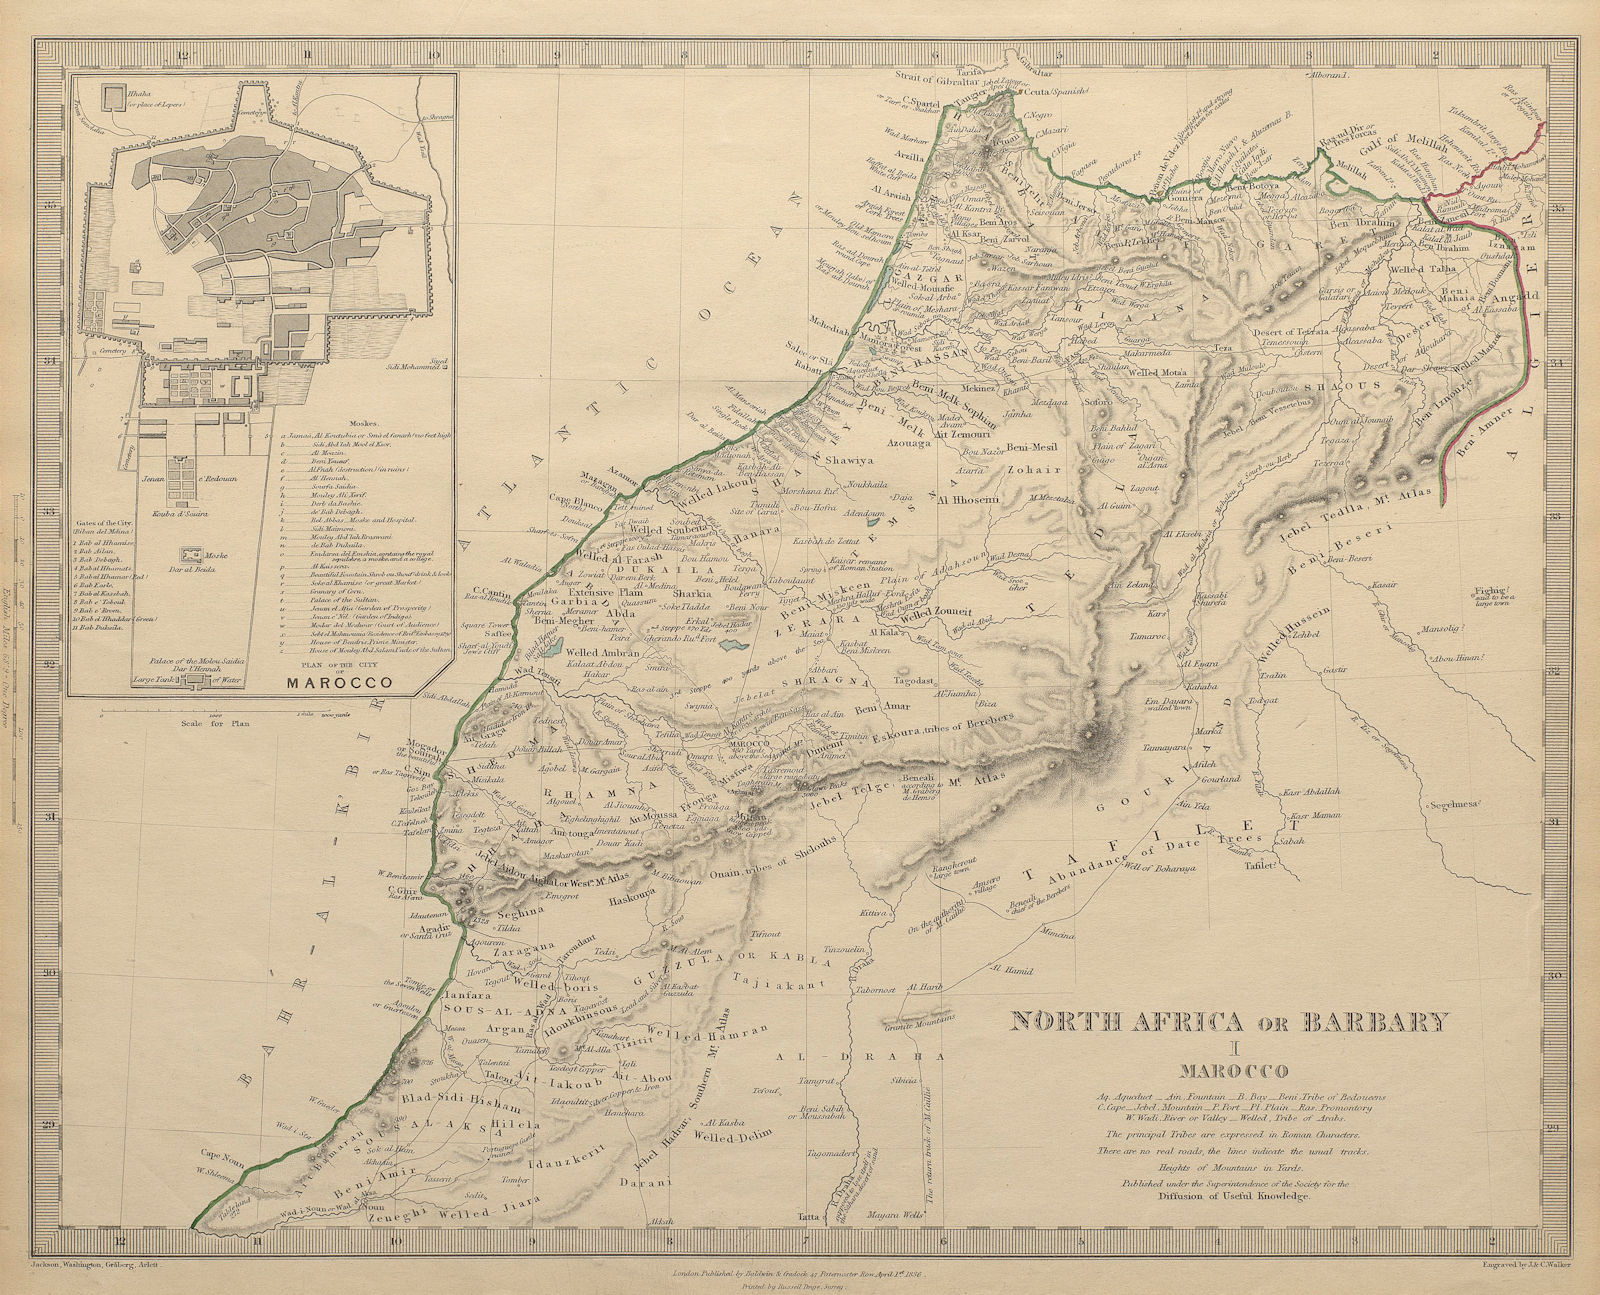 MOROCCO 'North Africa or Barbary' Marocco. Marrakech town plan. SDUK 1844 map